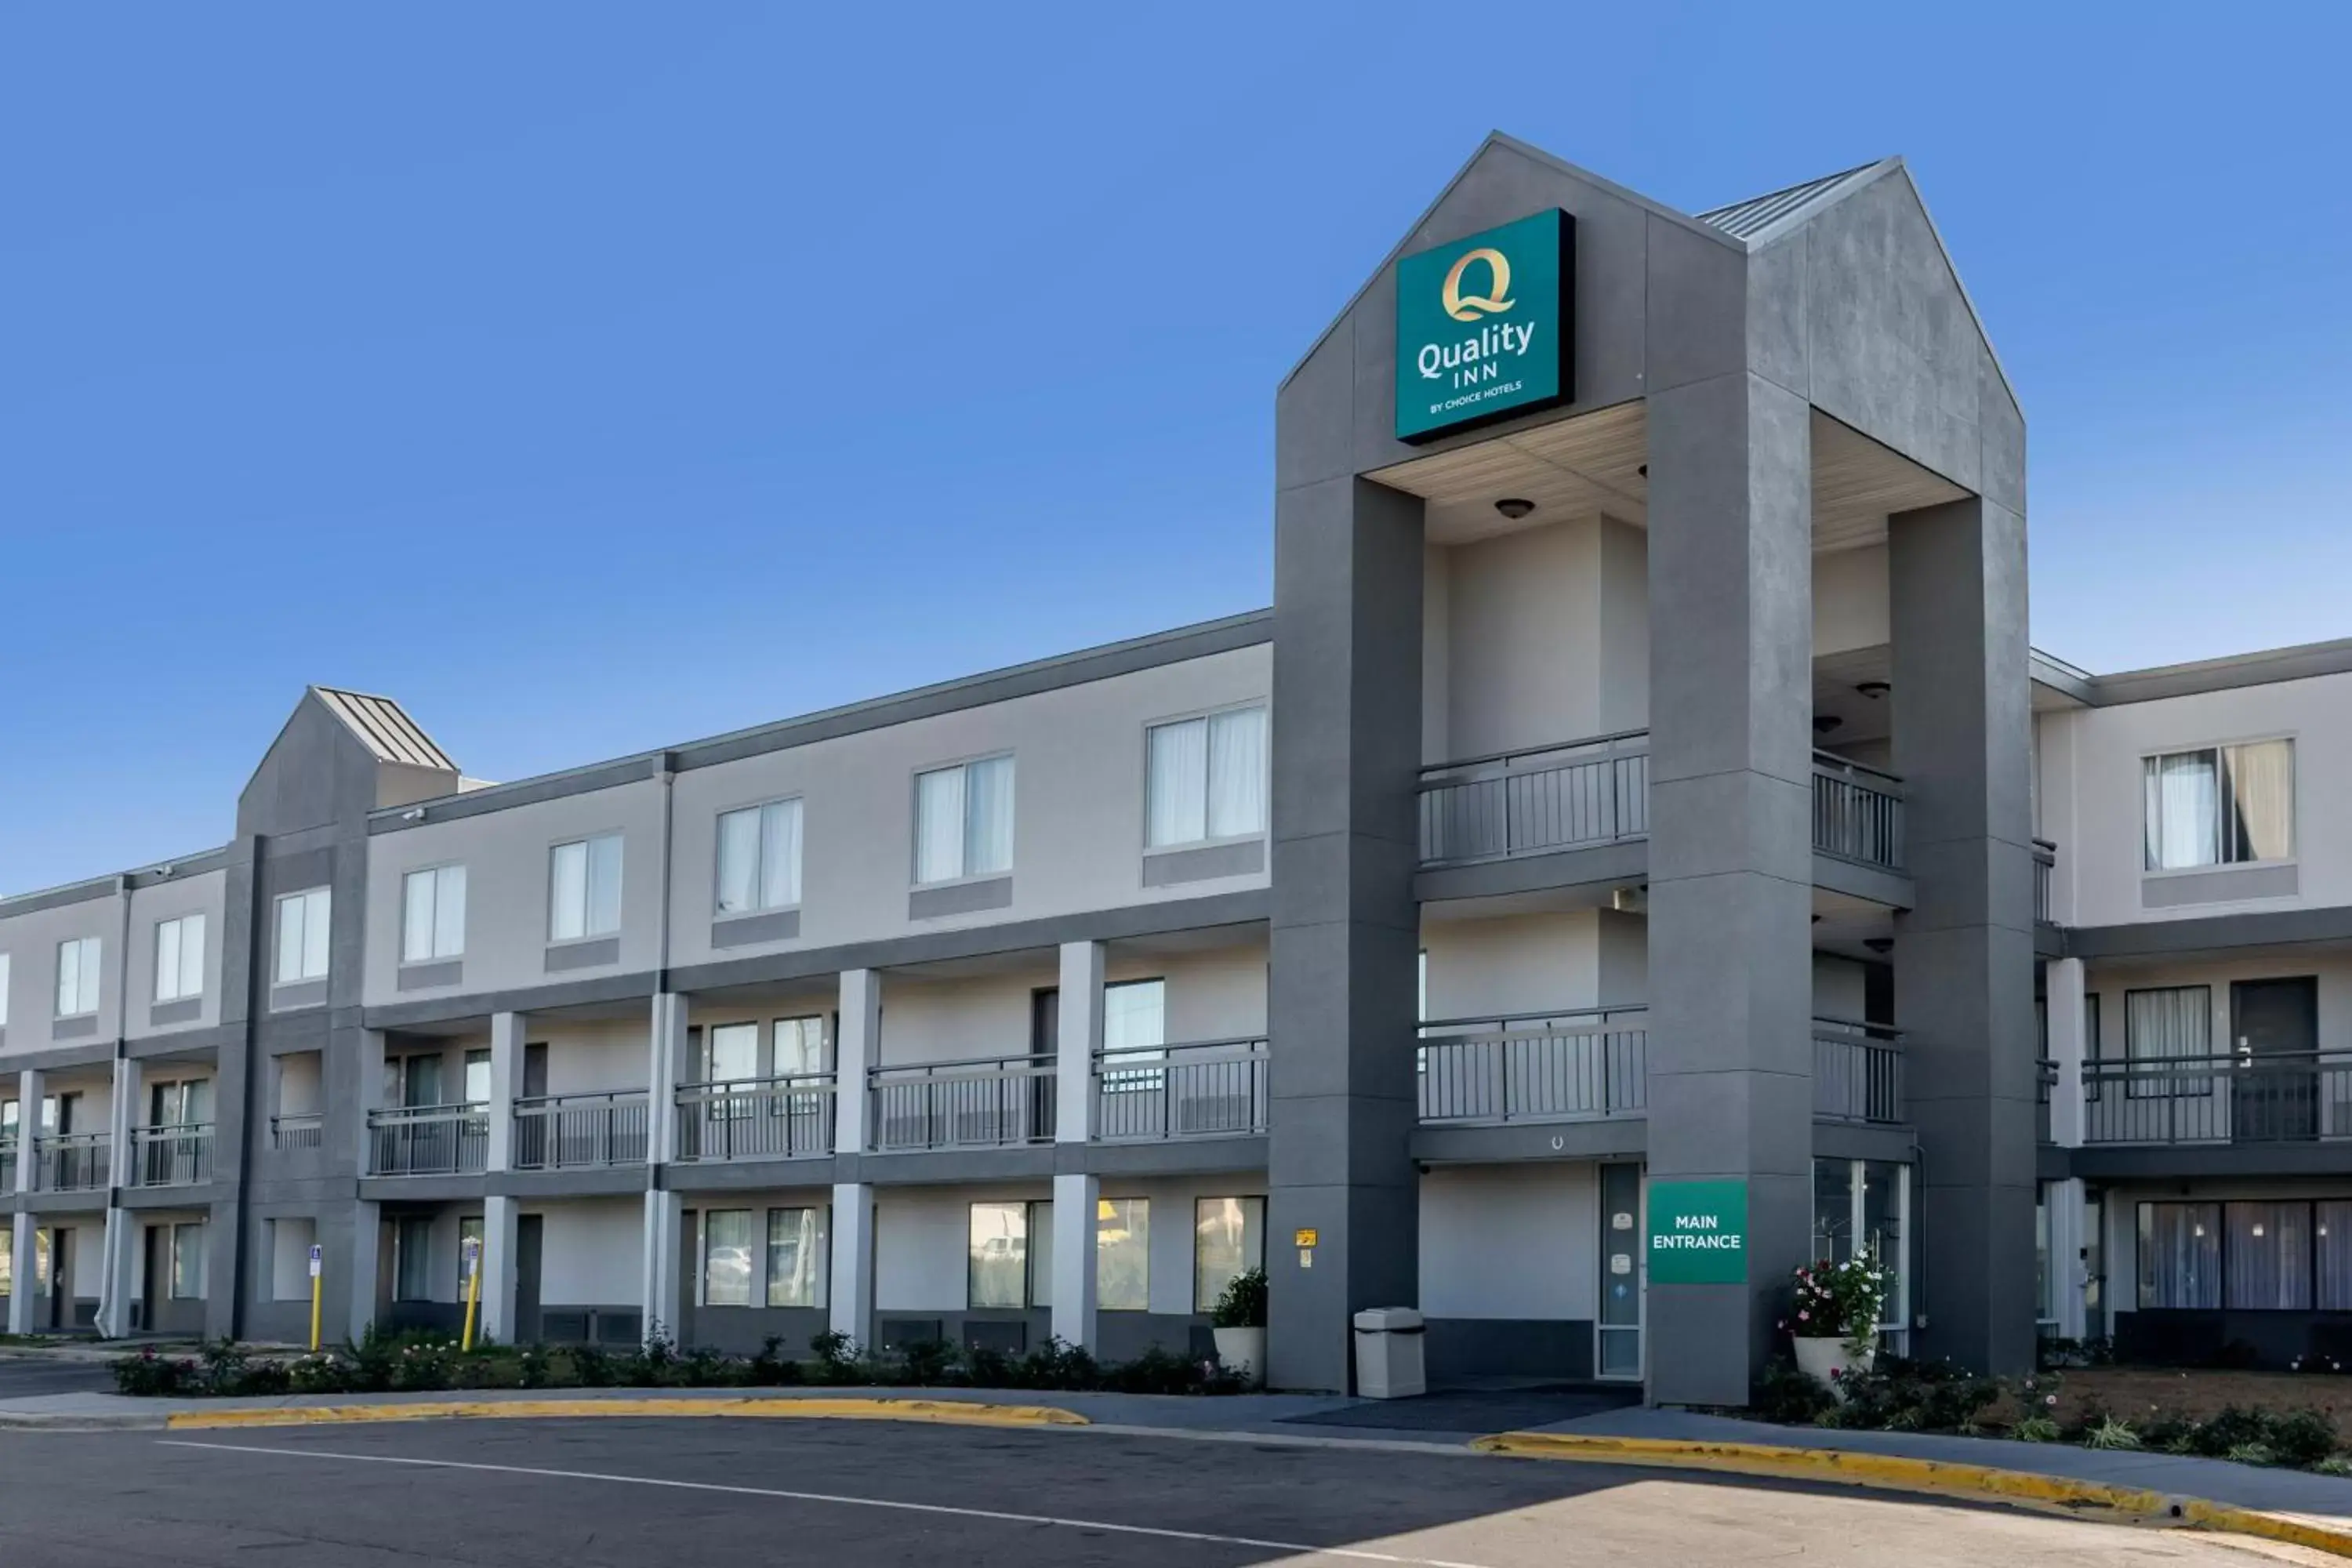 Property Building in Quality Inn Near Fort Liberty formerly Ft Bragg